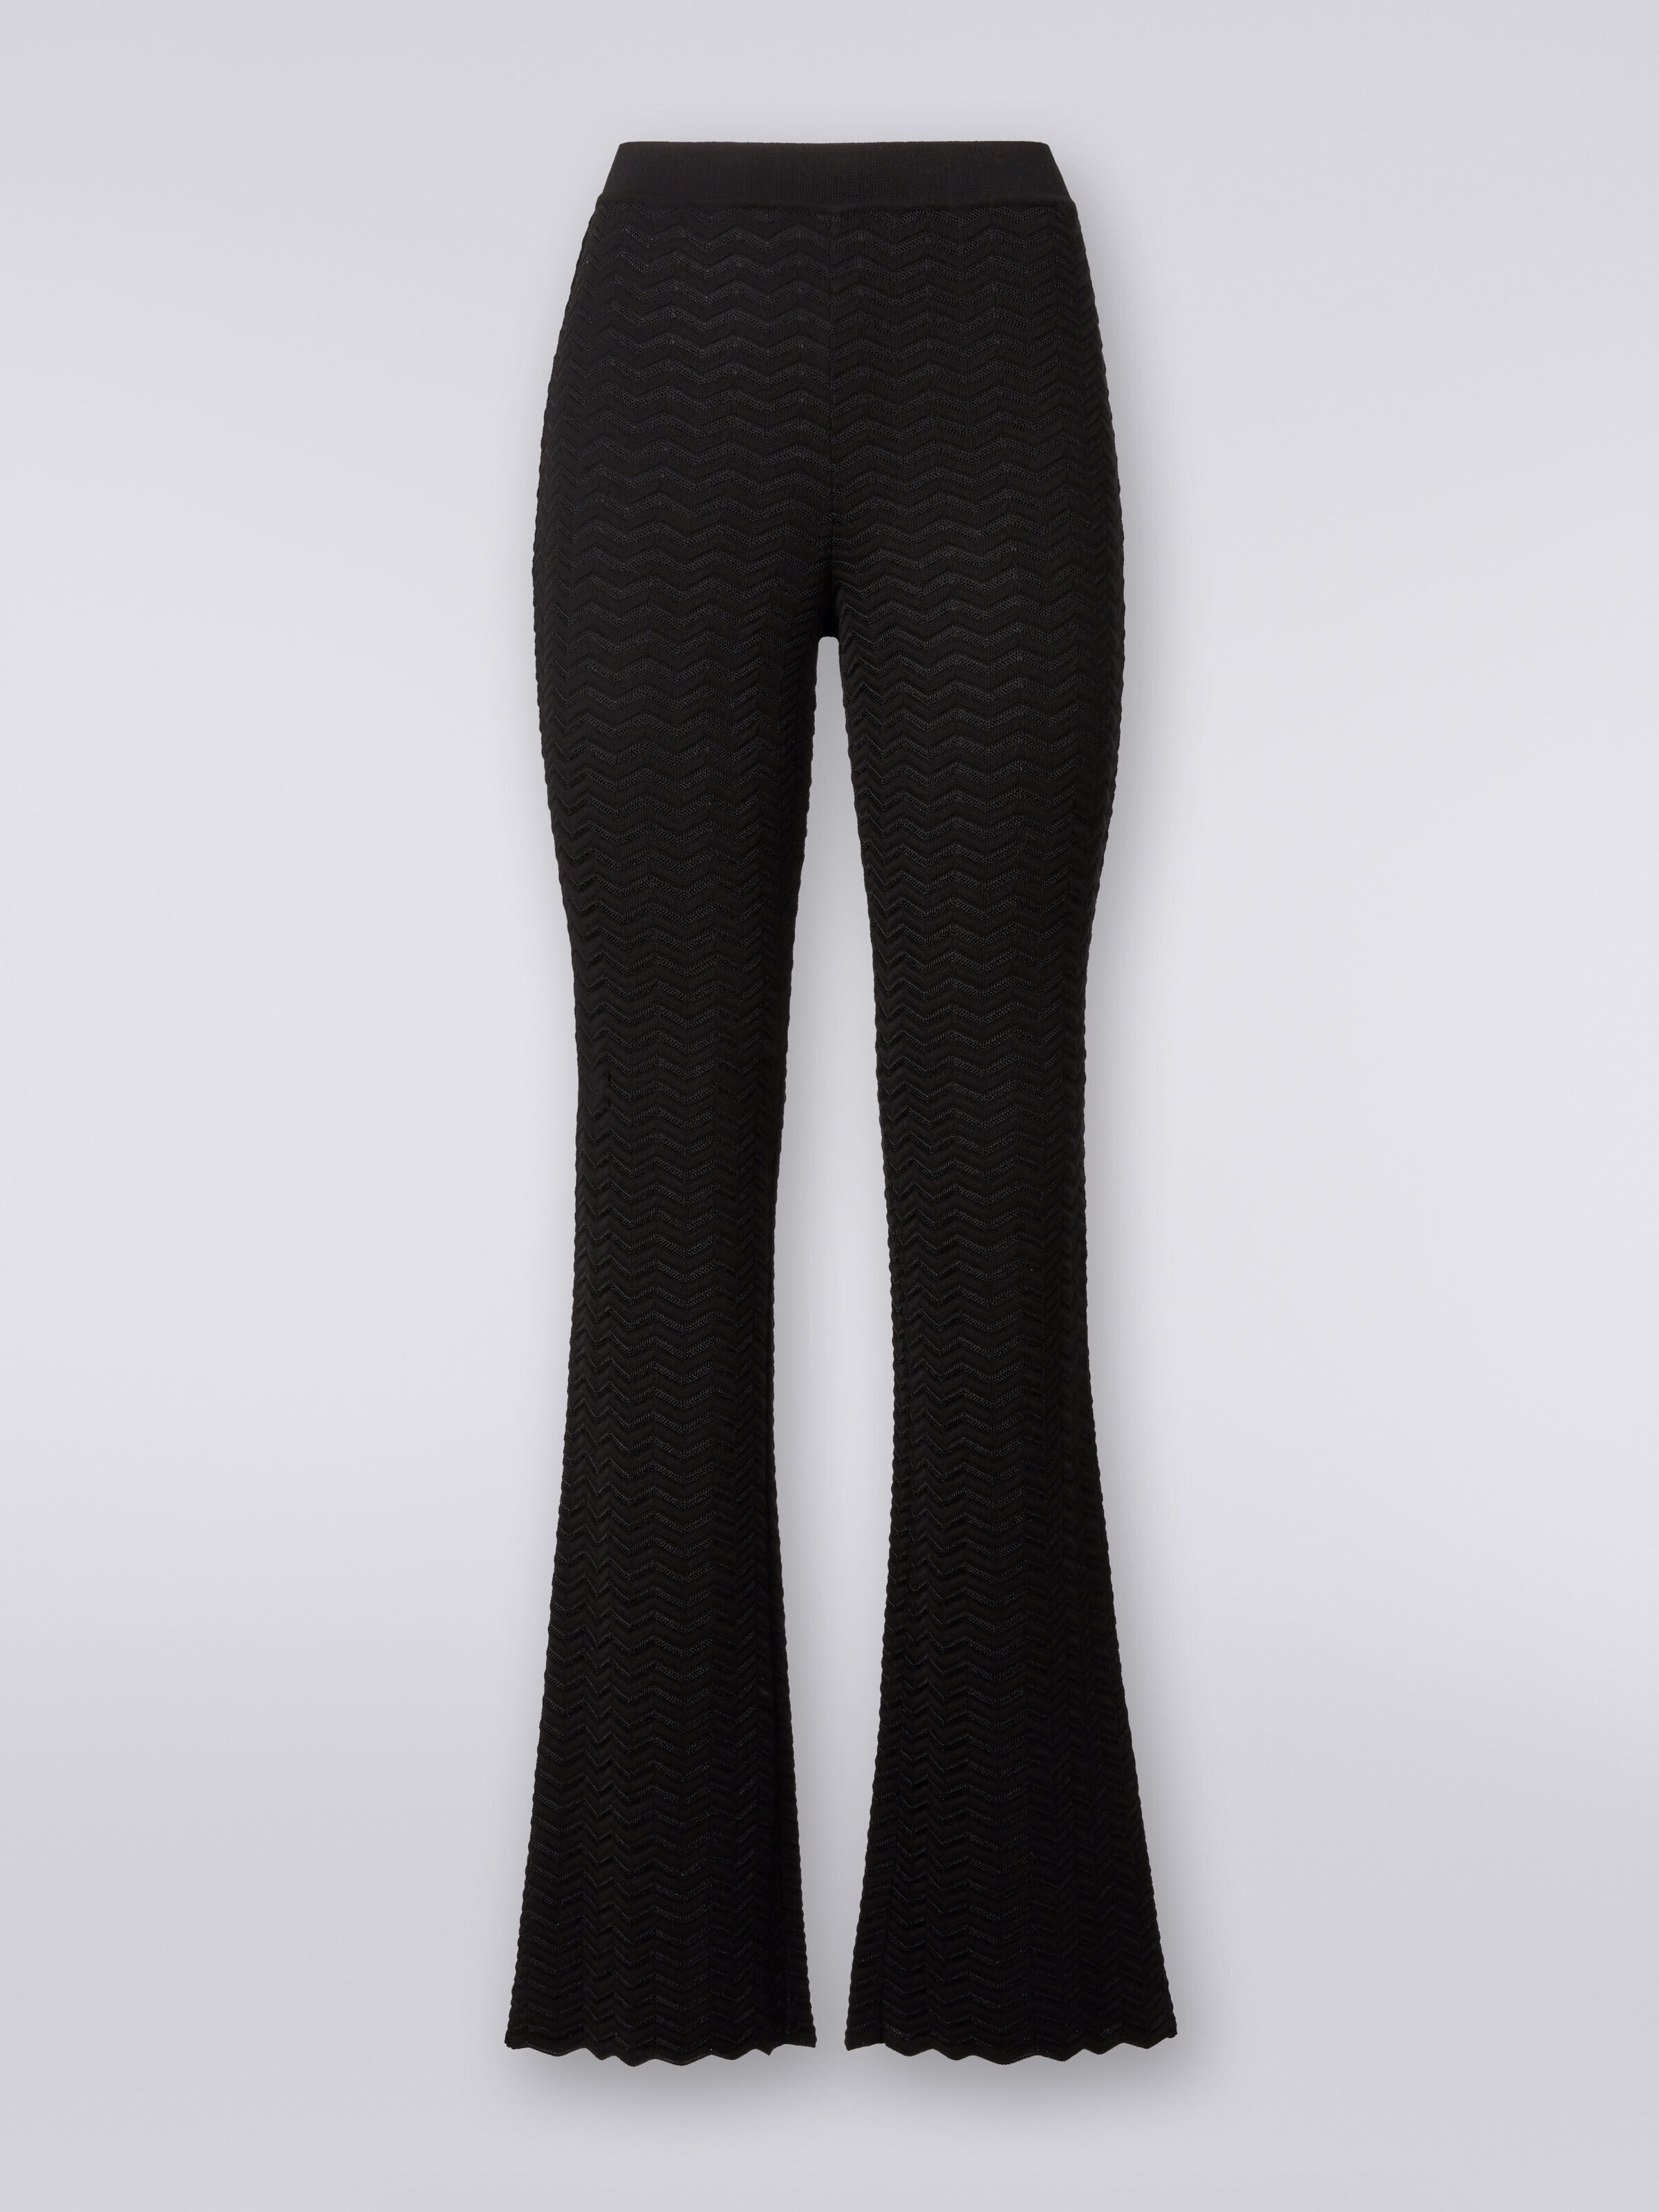 Trousers in zigzag knit  , Black    - 0